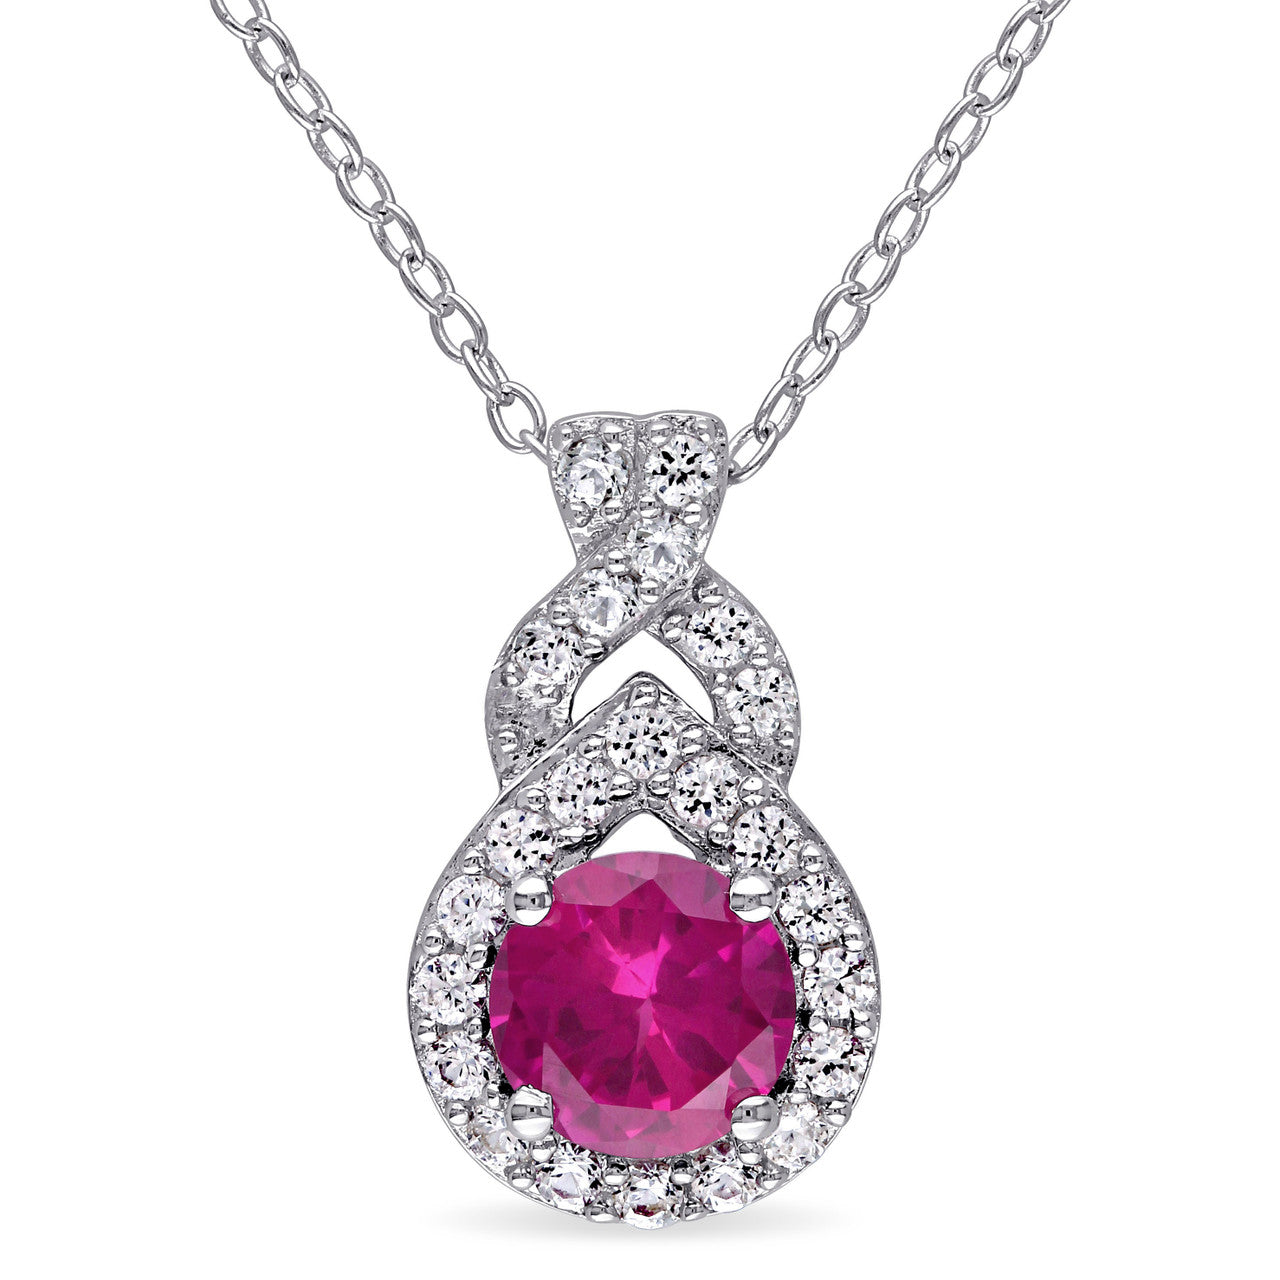 Ice Jewellery 1 4/5 CT TGW Created White Sapphire Created Ruby Fashion Pendant With Chain in Sterling Silver - 75000004877 | Ice Jewellery Australia